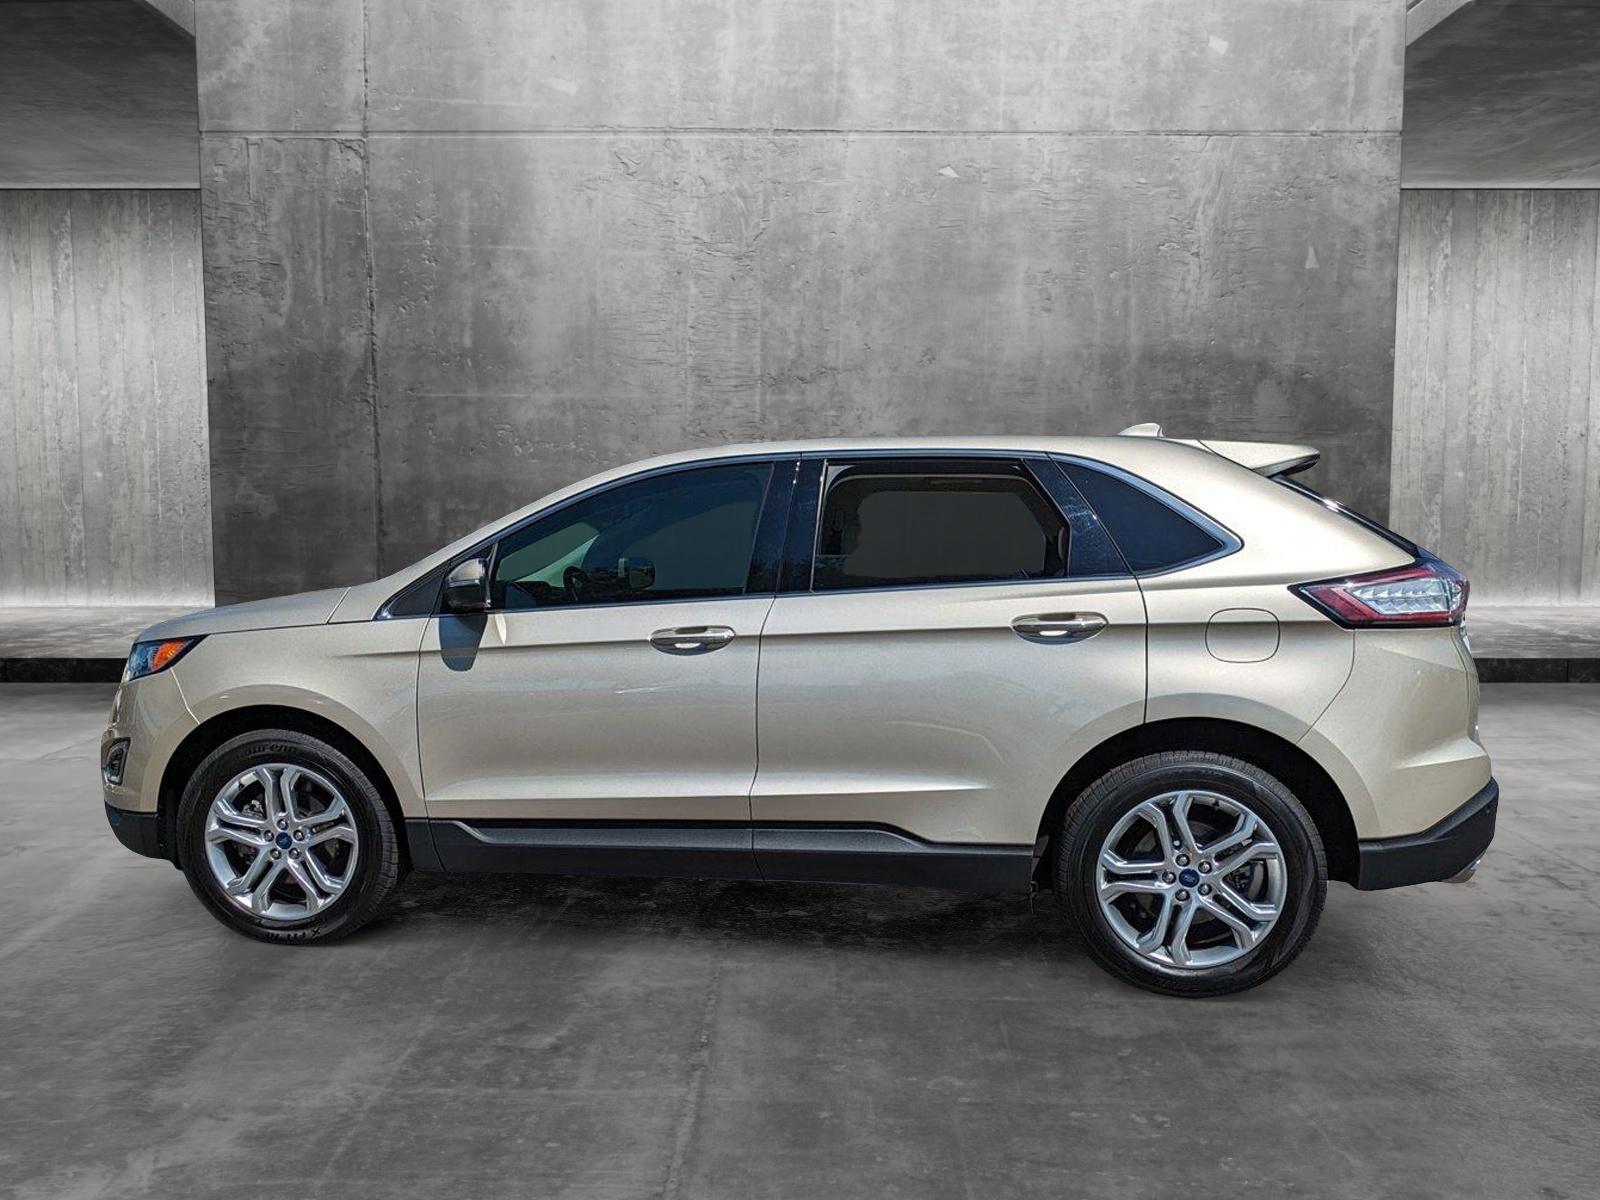 2018 Ford Edge Vehicle Photo in Jacksonville, FL 32244